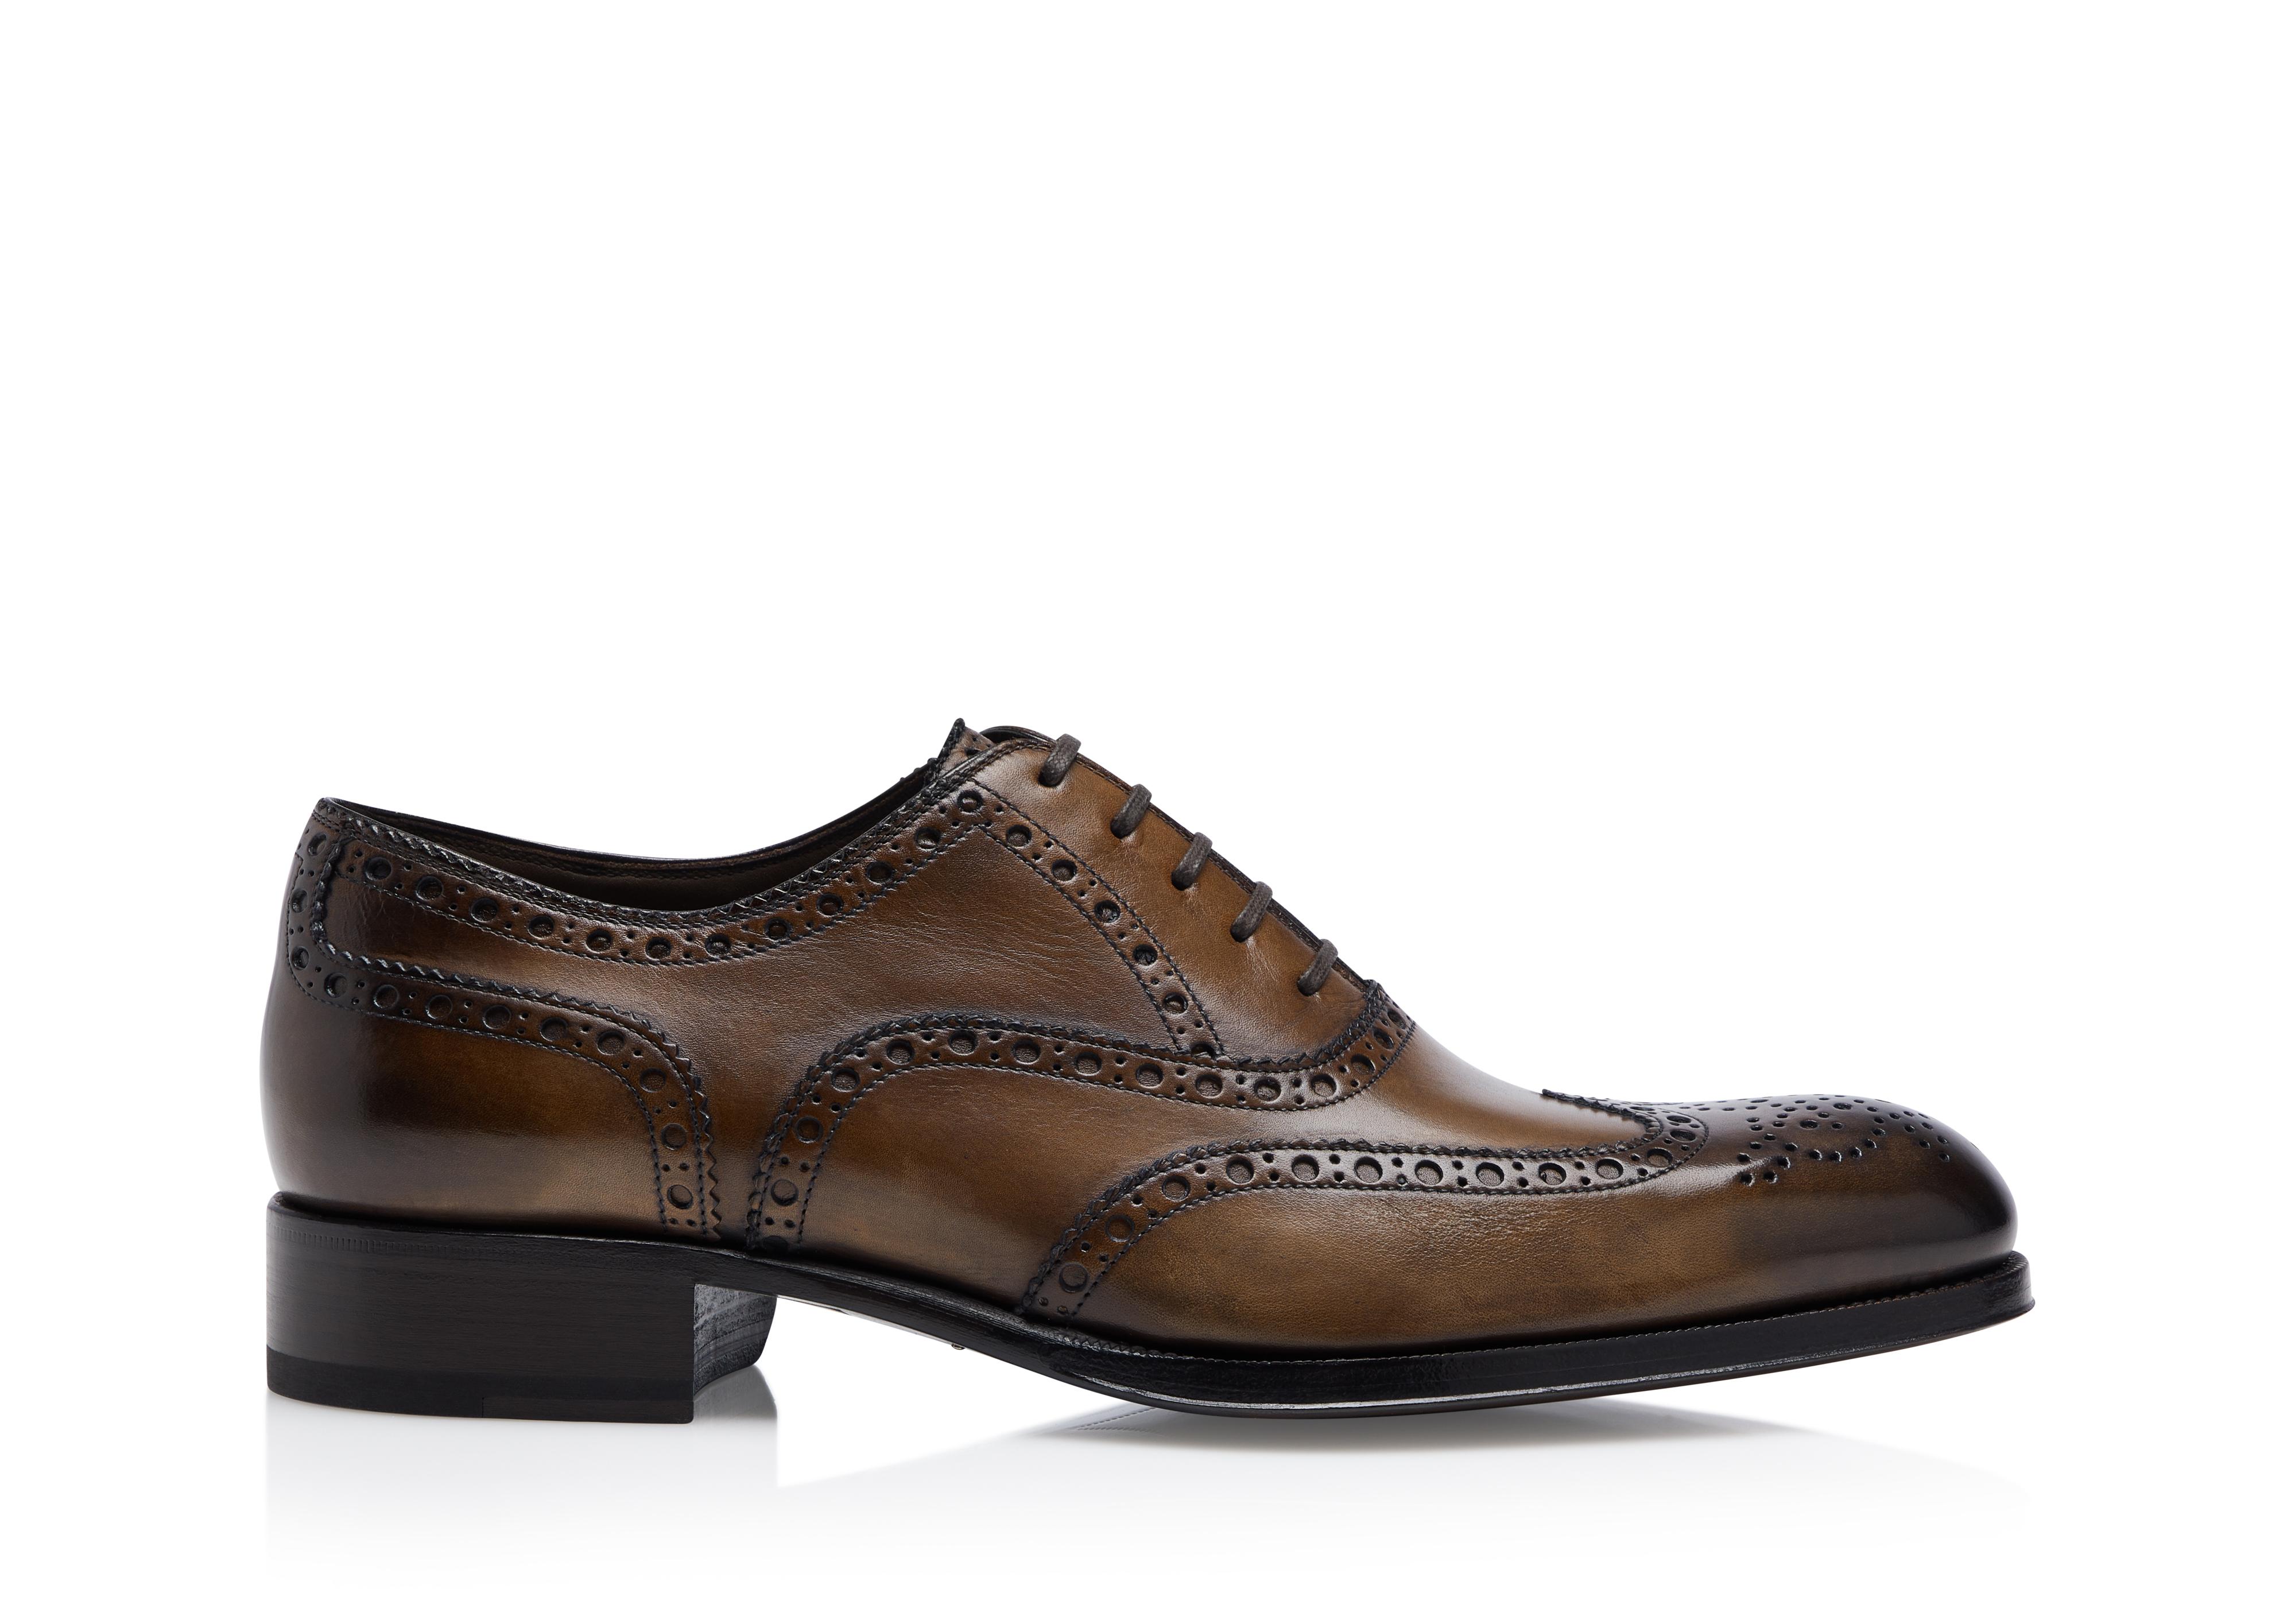 Tom Ford Brown Brogue Leather Lace Up Oxfords Size 44 Tom Ford